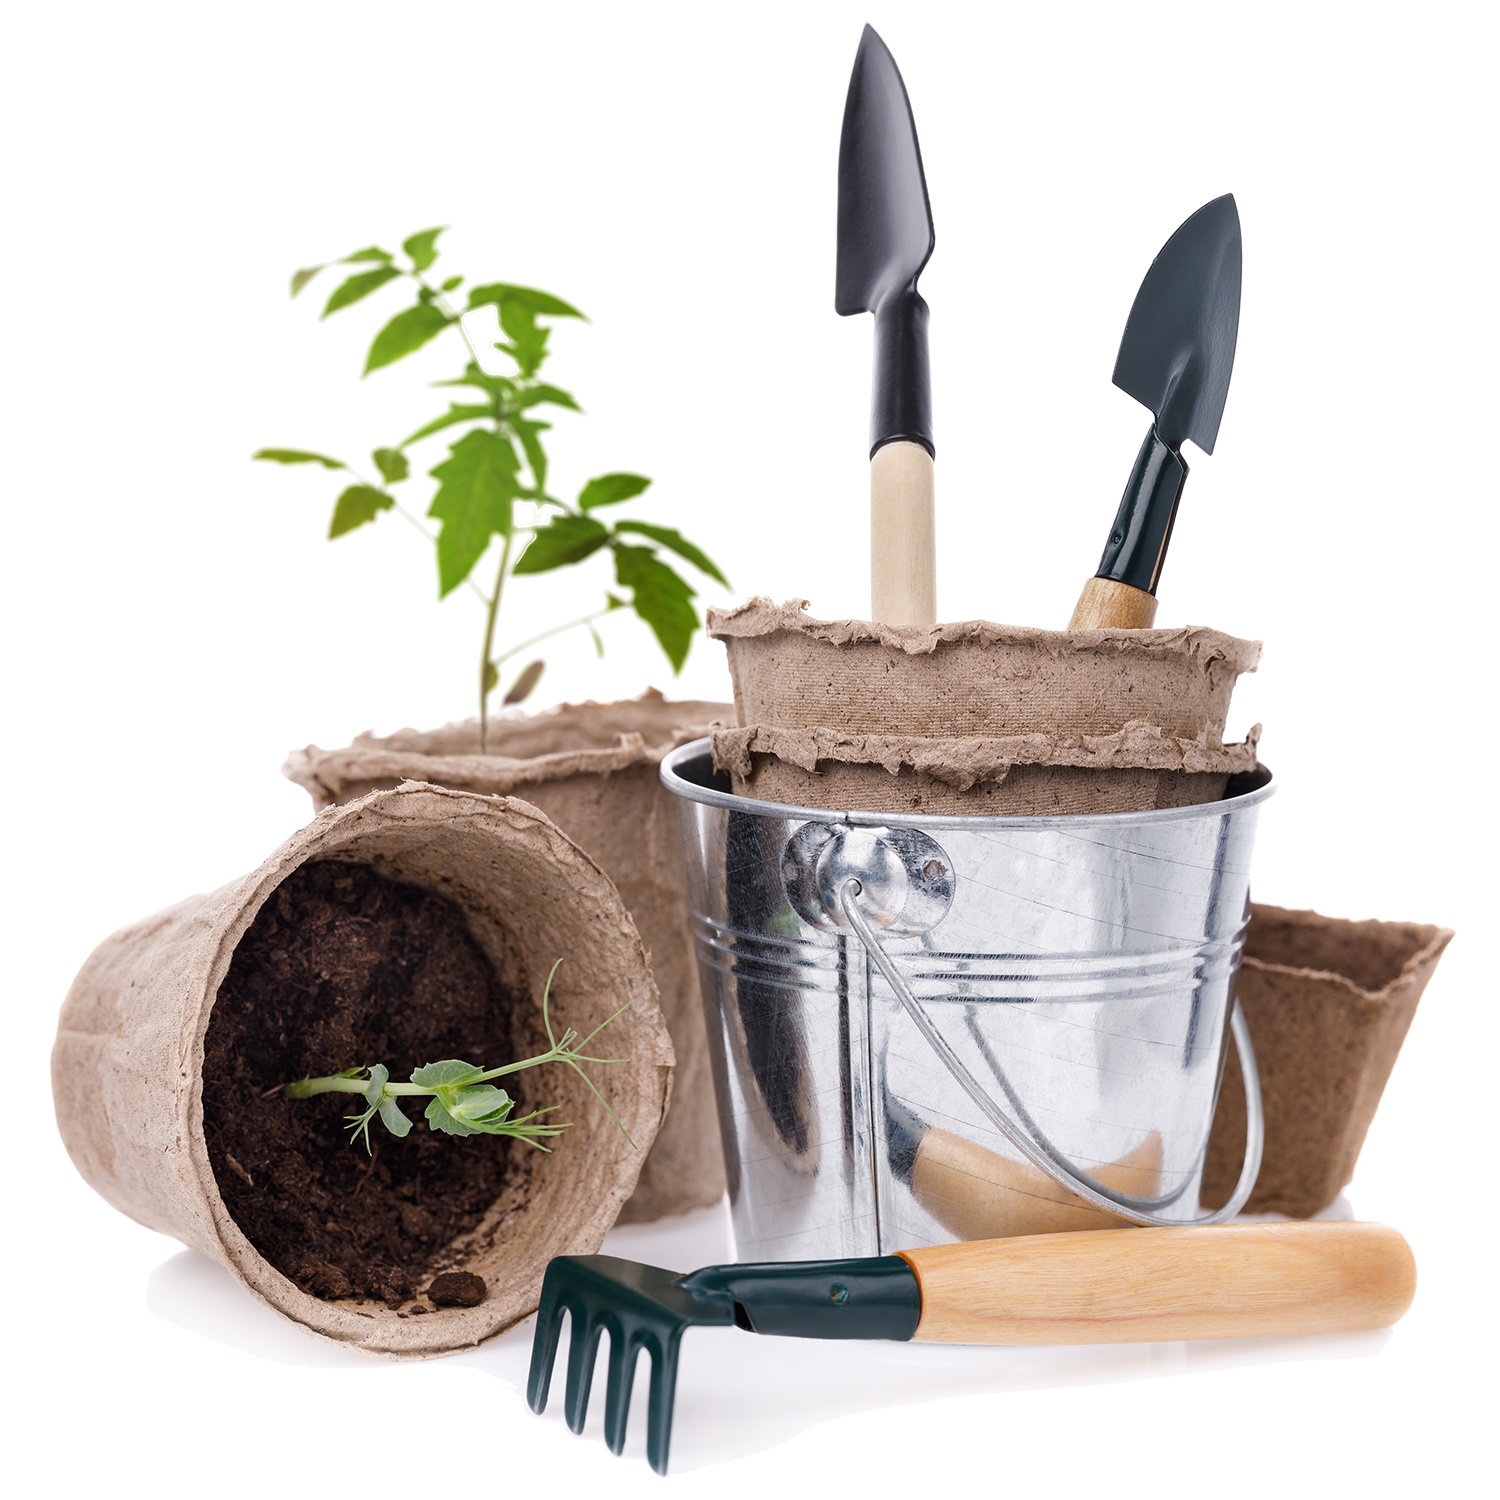 png with transparent background, gardening tools like shovels and baby plants in brown biodegradable containers